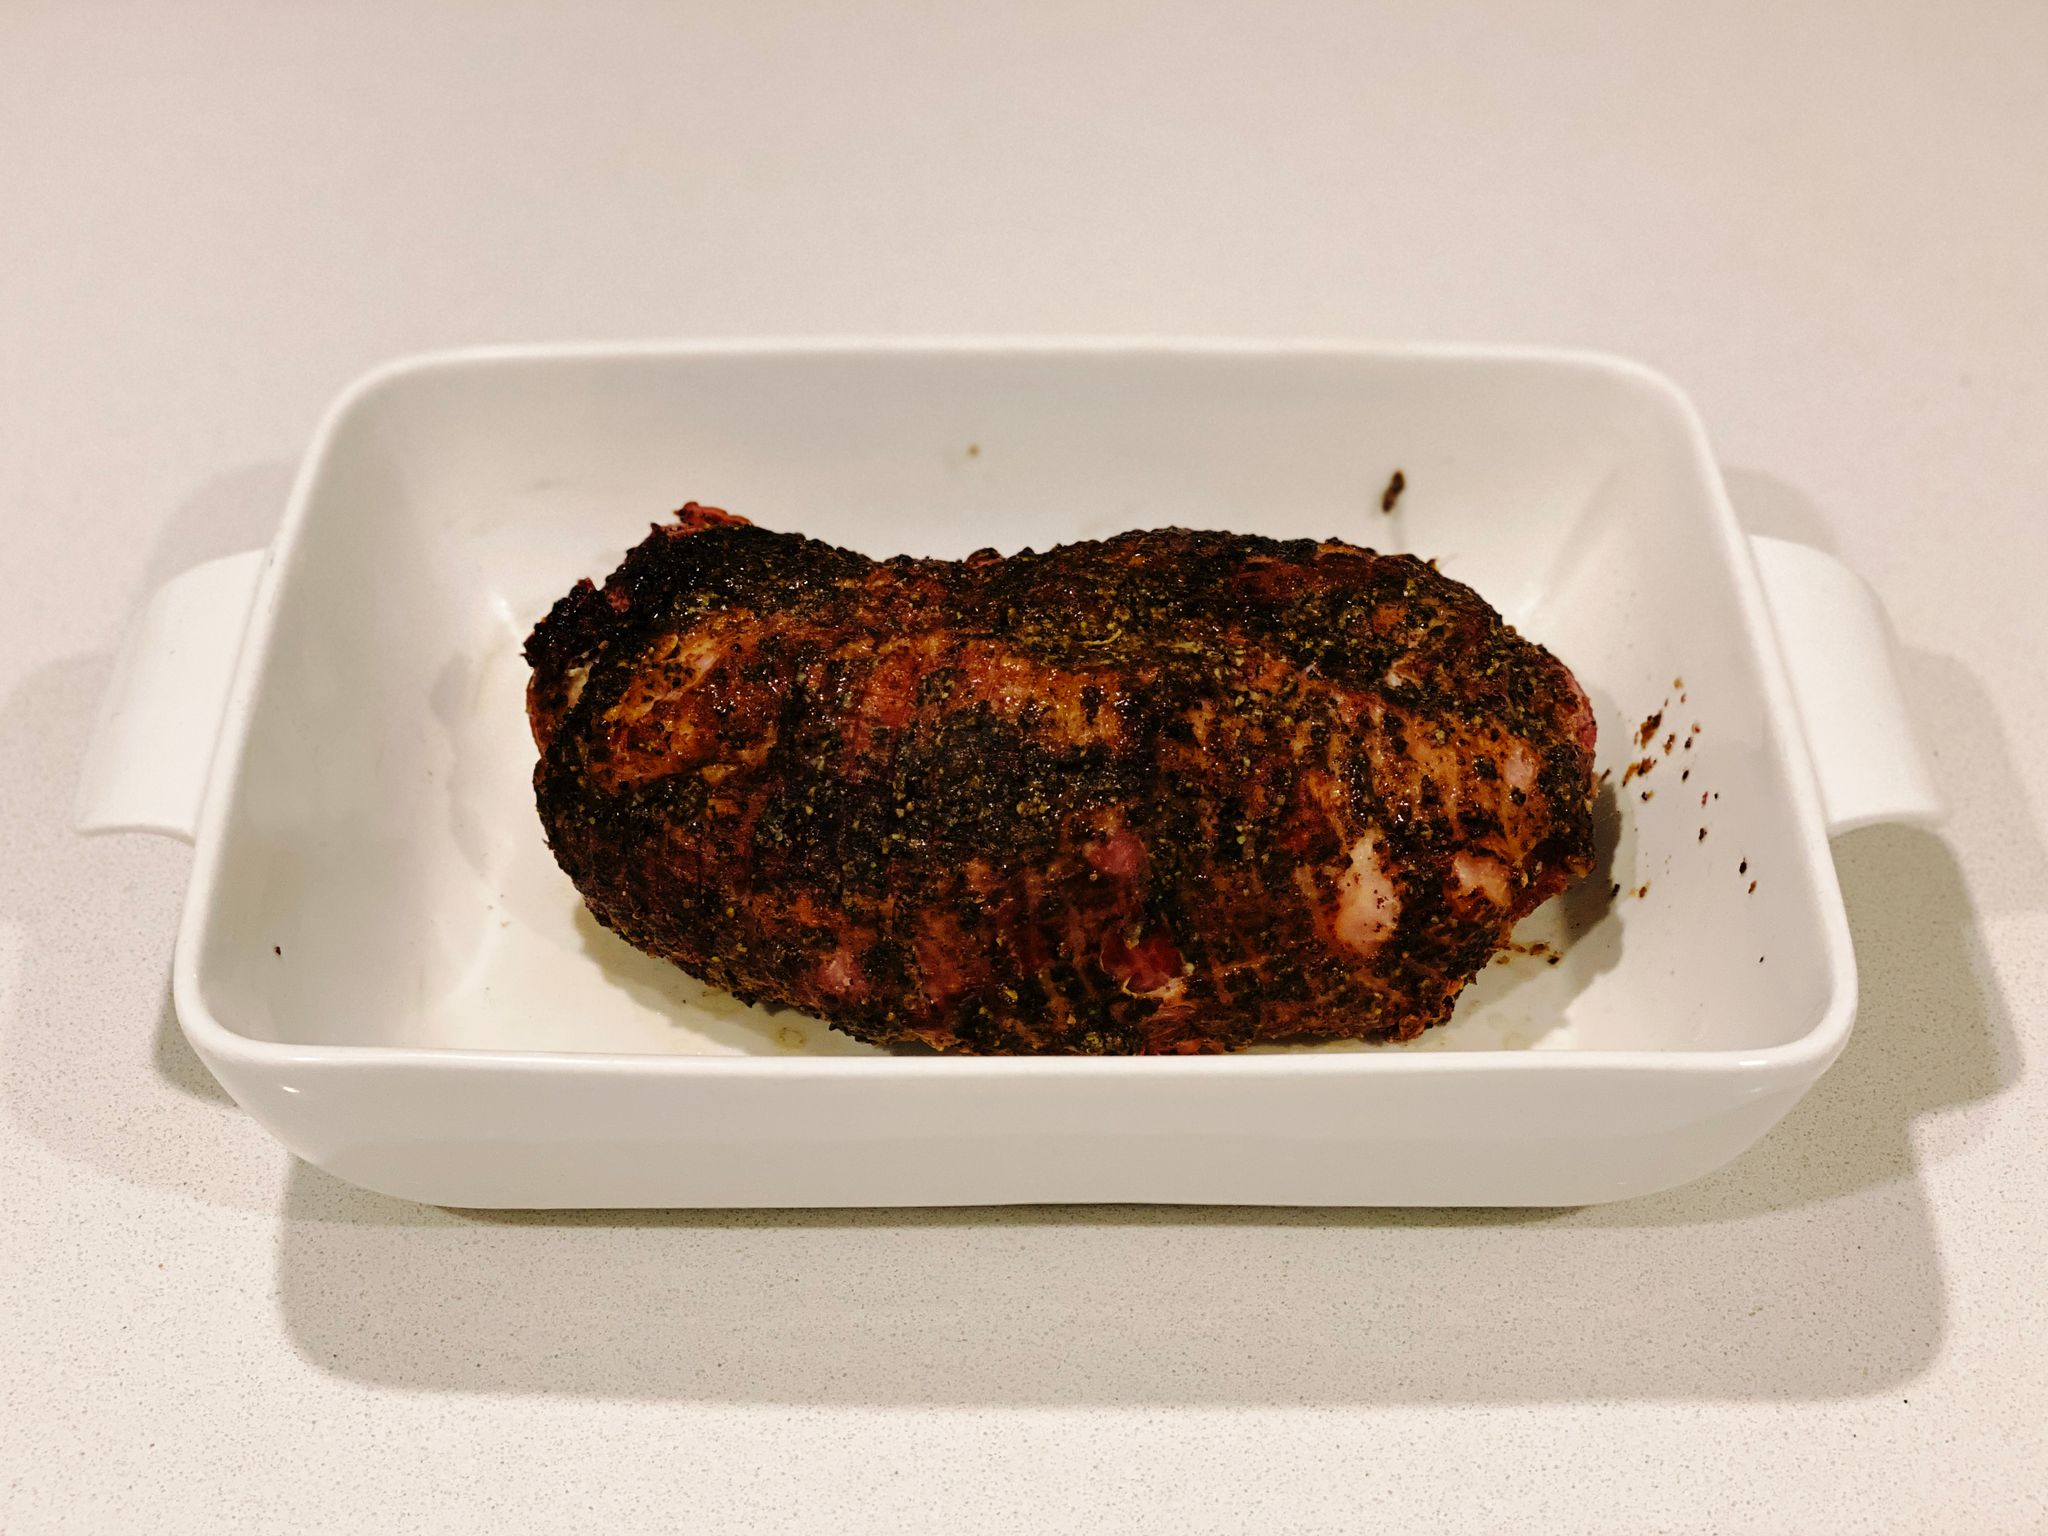 A photo of a hunk of cooked pork covered in pepper and looking delicious.